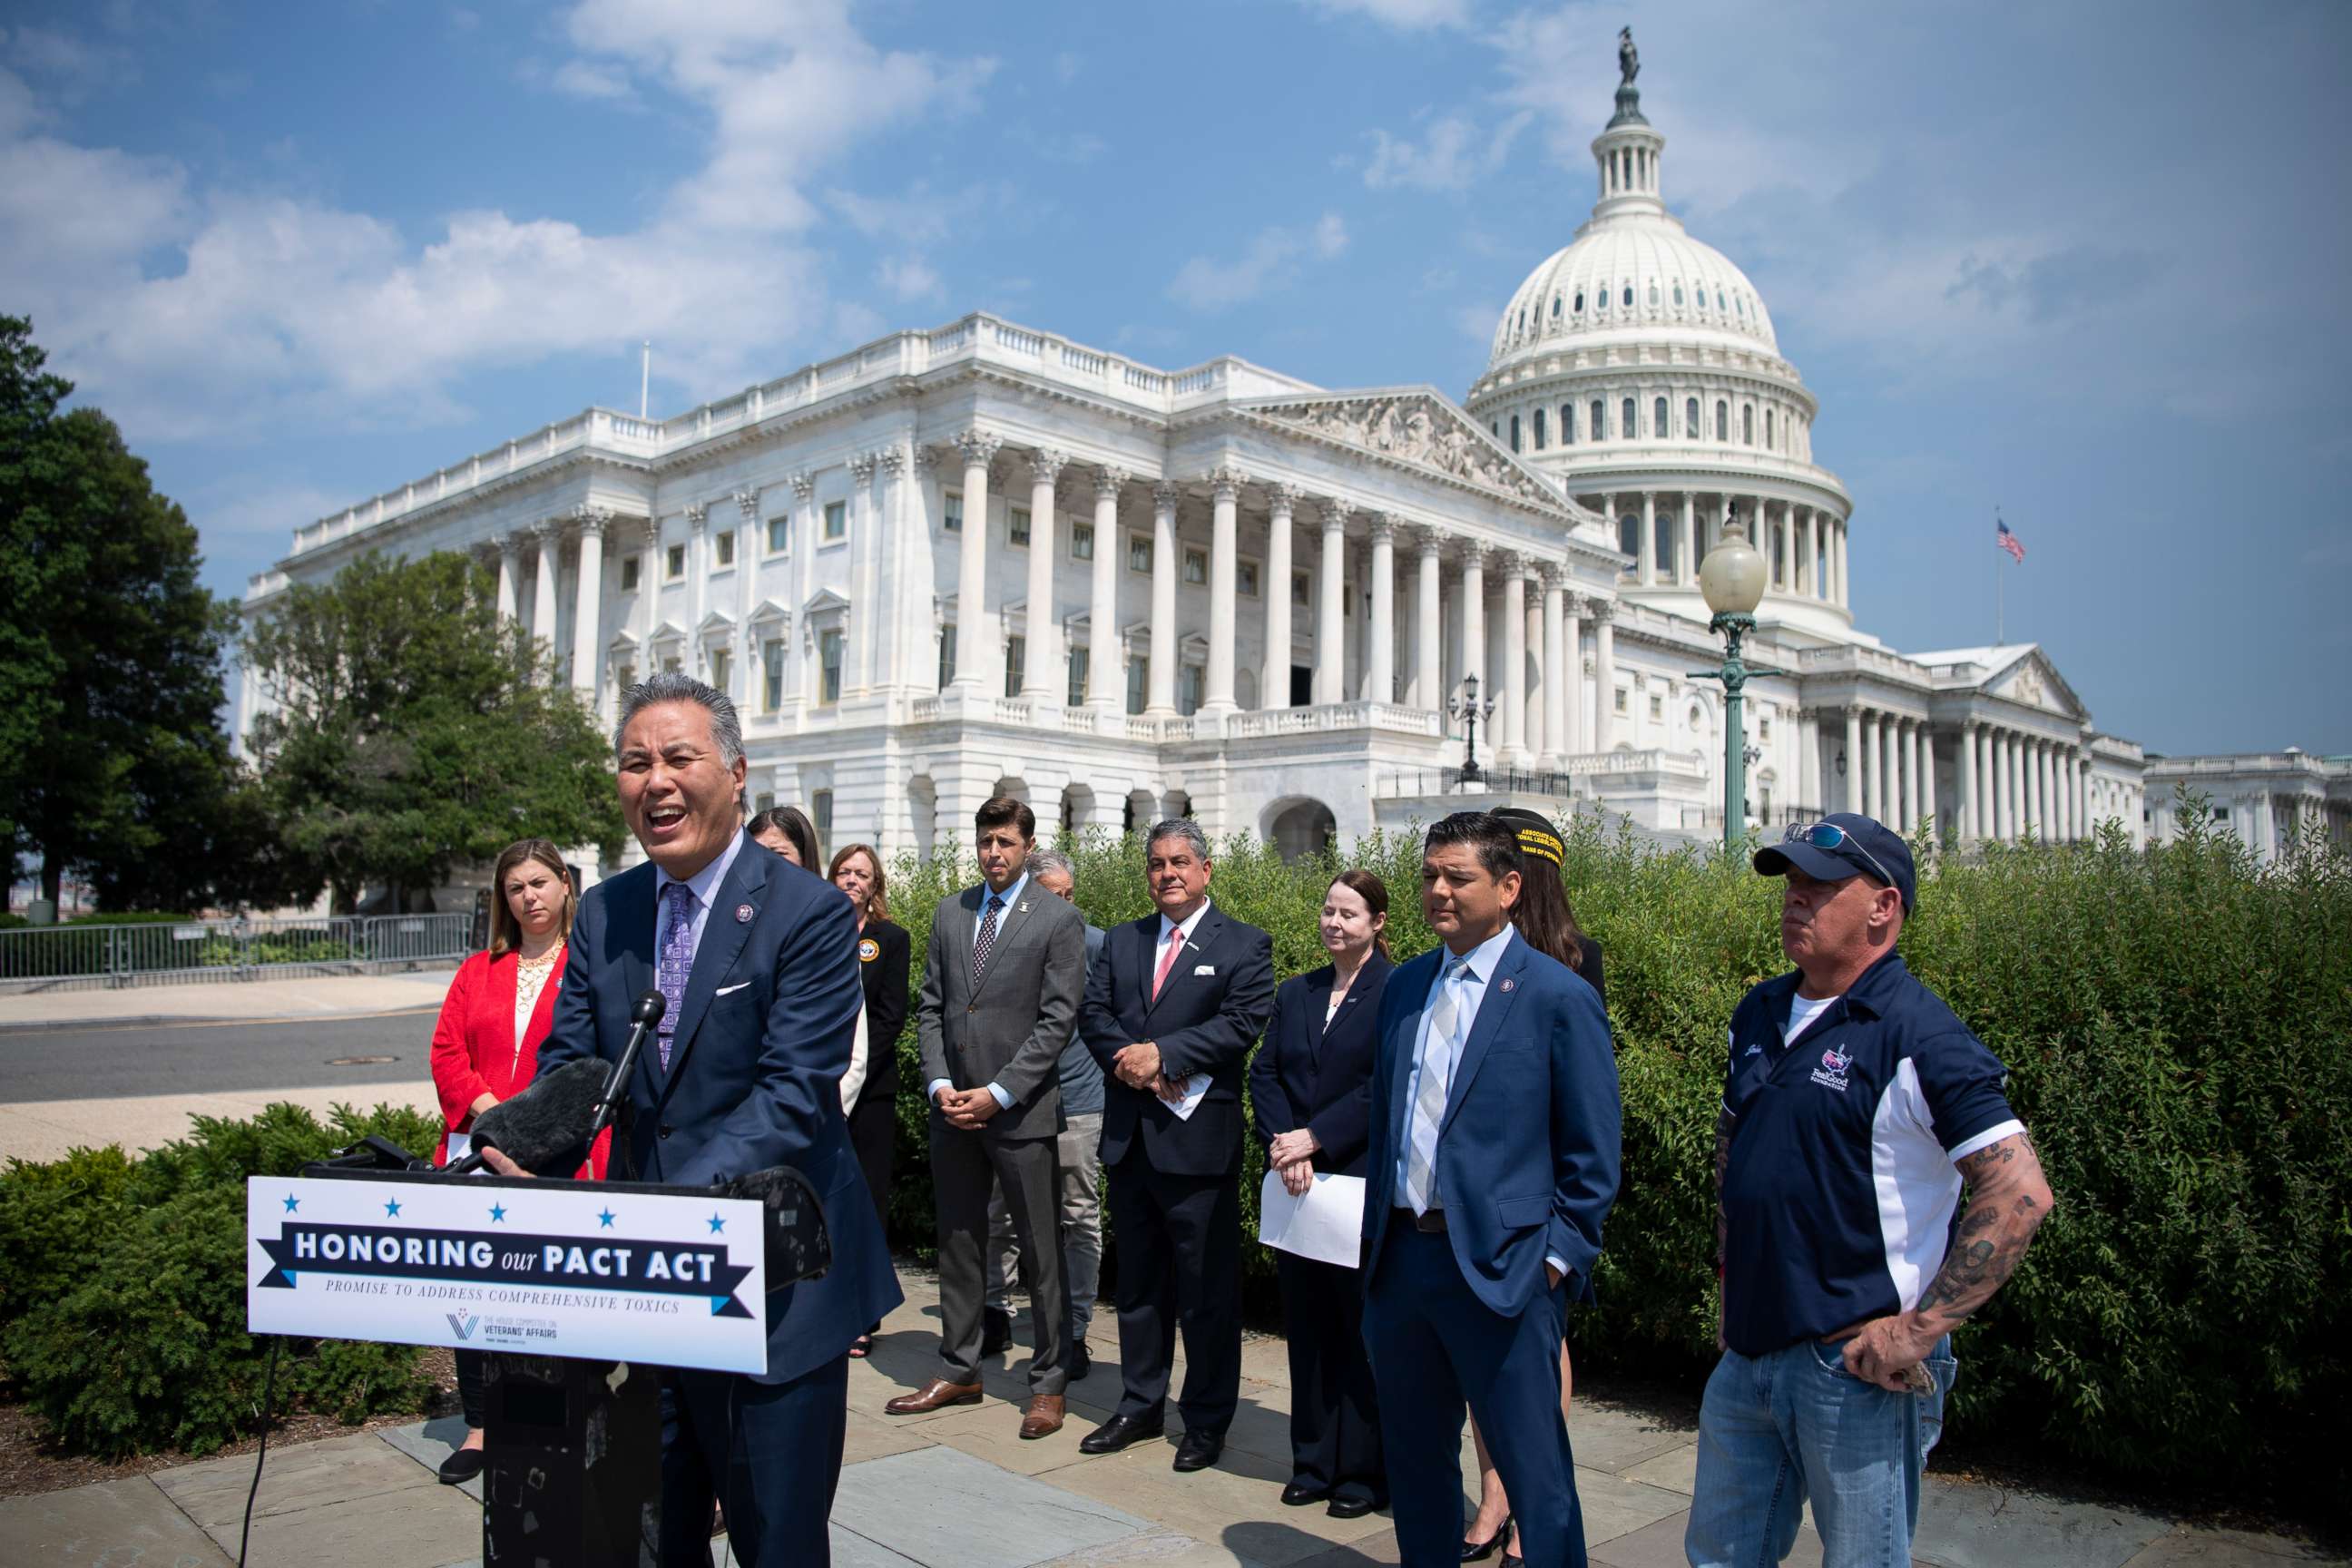 PHOTO: Rep. Mark Takano speaks during a news conference to unveil legislation to expand benefits and improve care for veterans suffering from toxic exposure to burn pits and other hazards, in Washington, May 26, 2021.